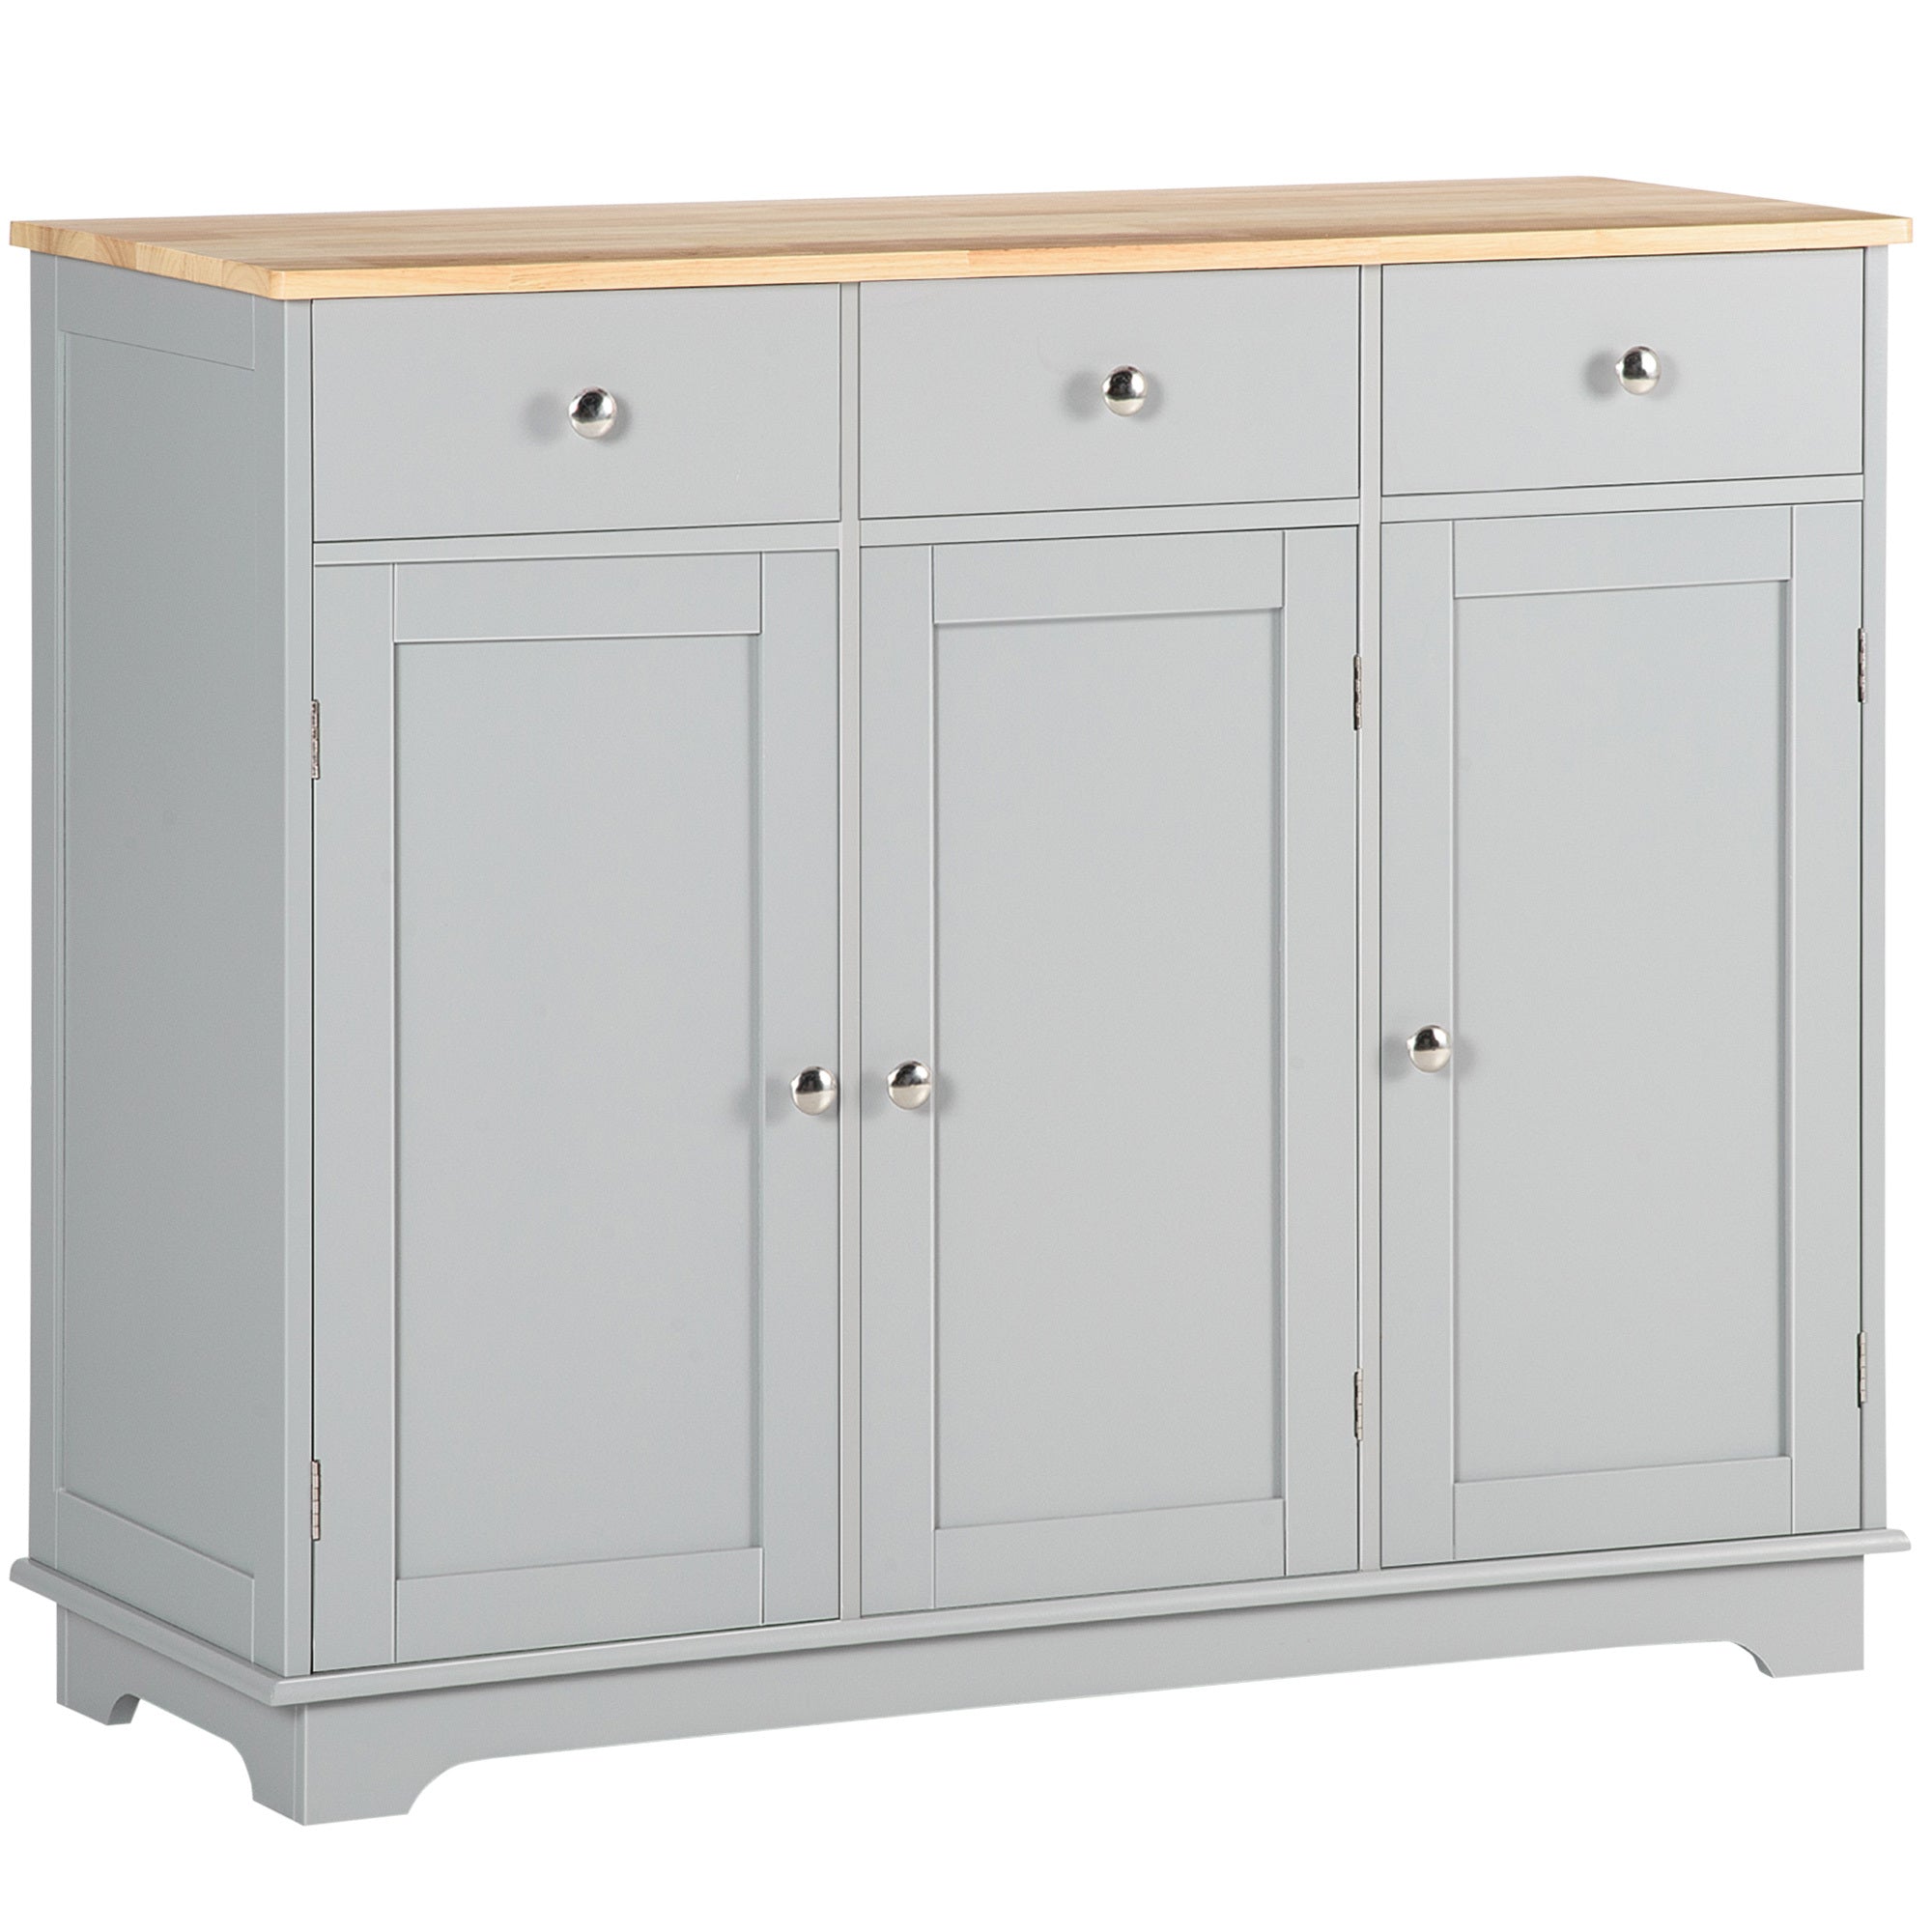 Sideboard Buffet Cabinet with Drawers, Kitchen